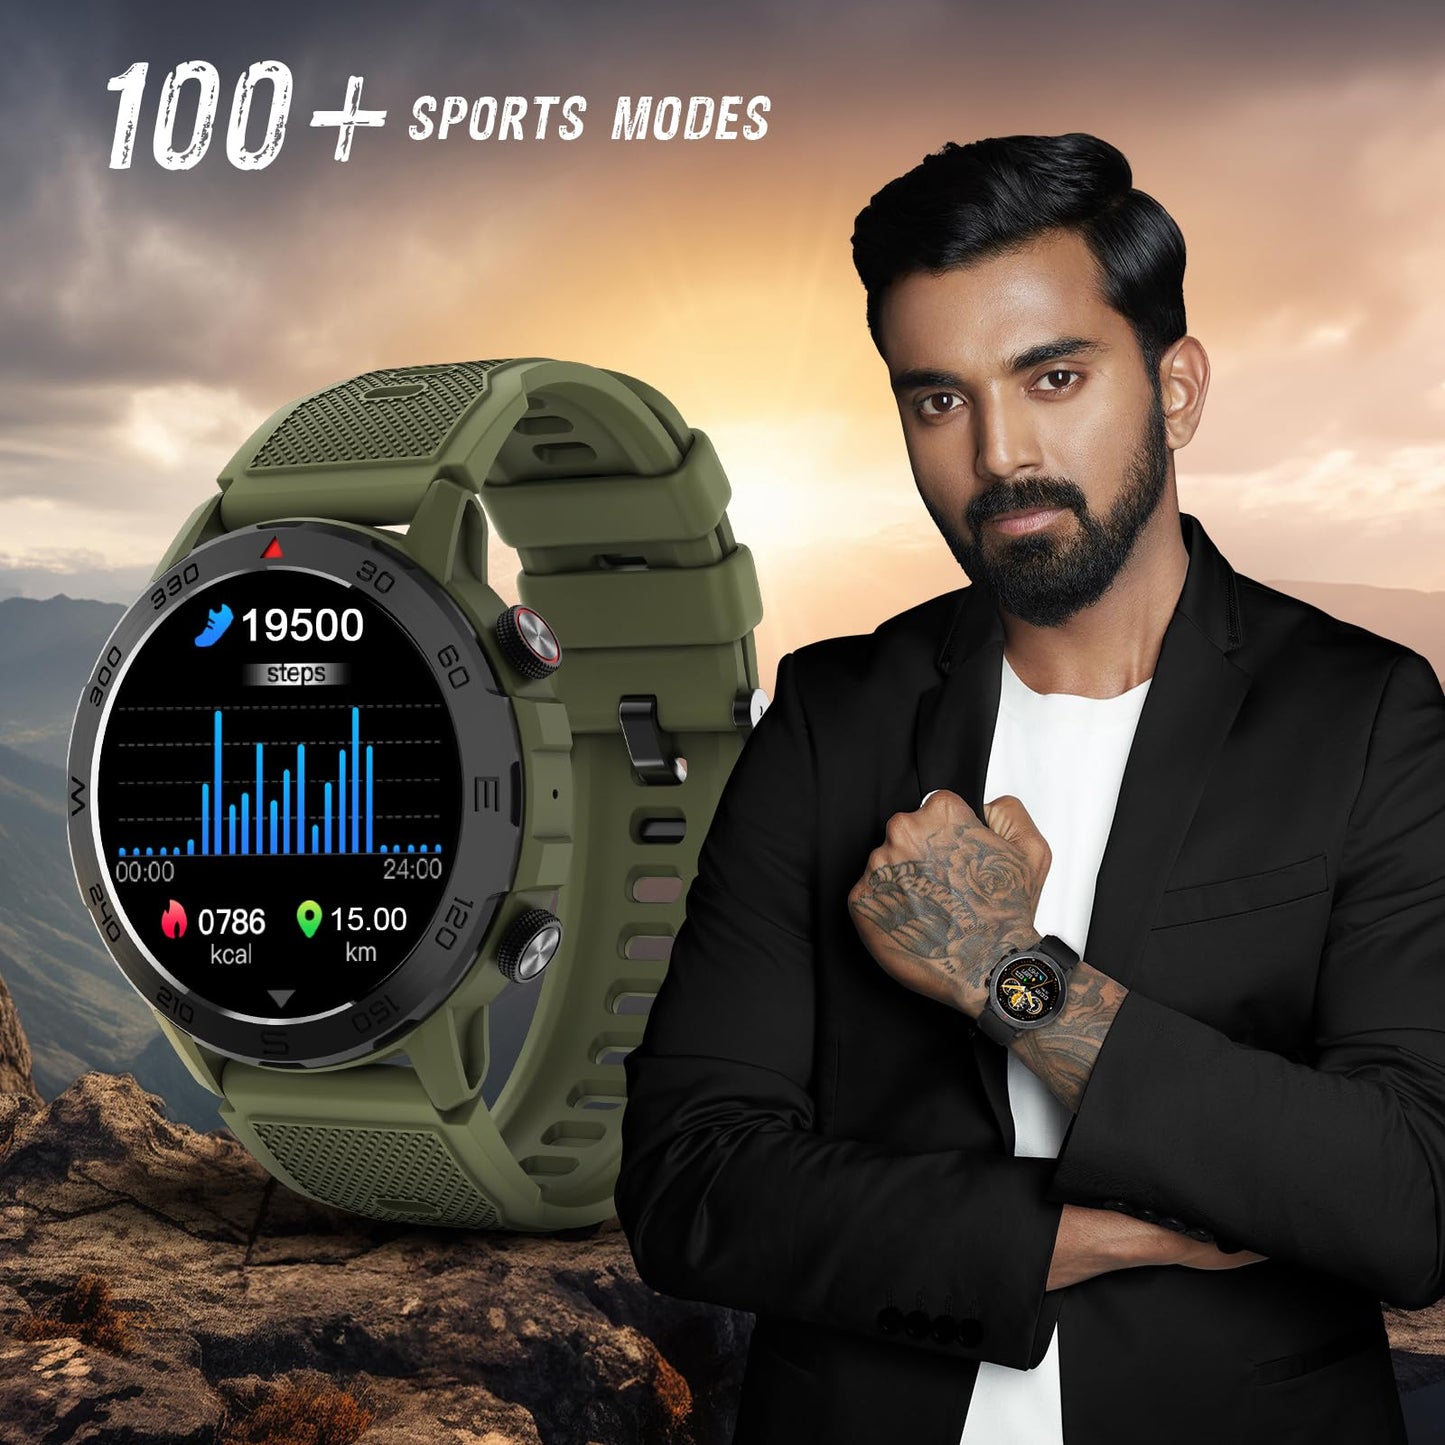 beatXP Duke Rugged 1.43” Round Super AMOLED Bluetooth Calling Smart Watch, Functional Crown, 466*466px, 60Hz refresh rate, AI Voice Assistance, 100+ Sports Modes, 24/7 Health Monitoring (Army Green) 